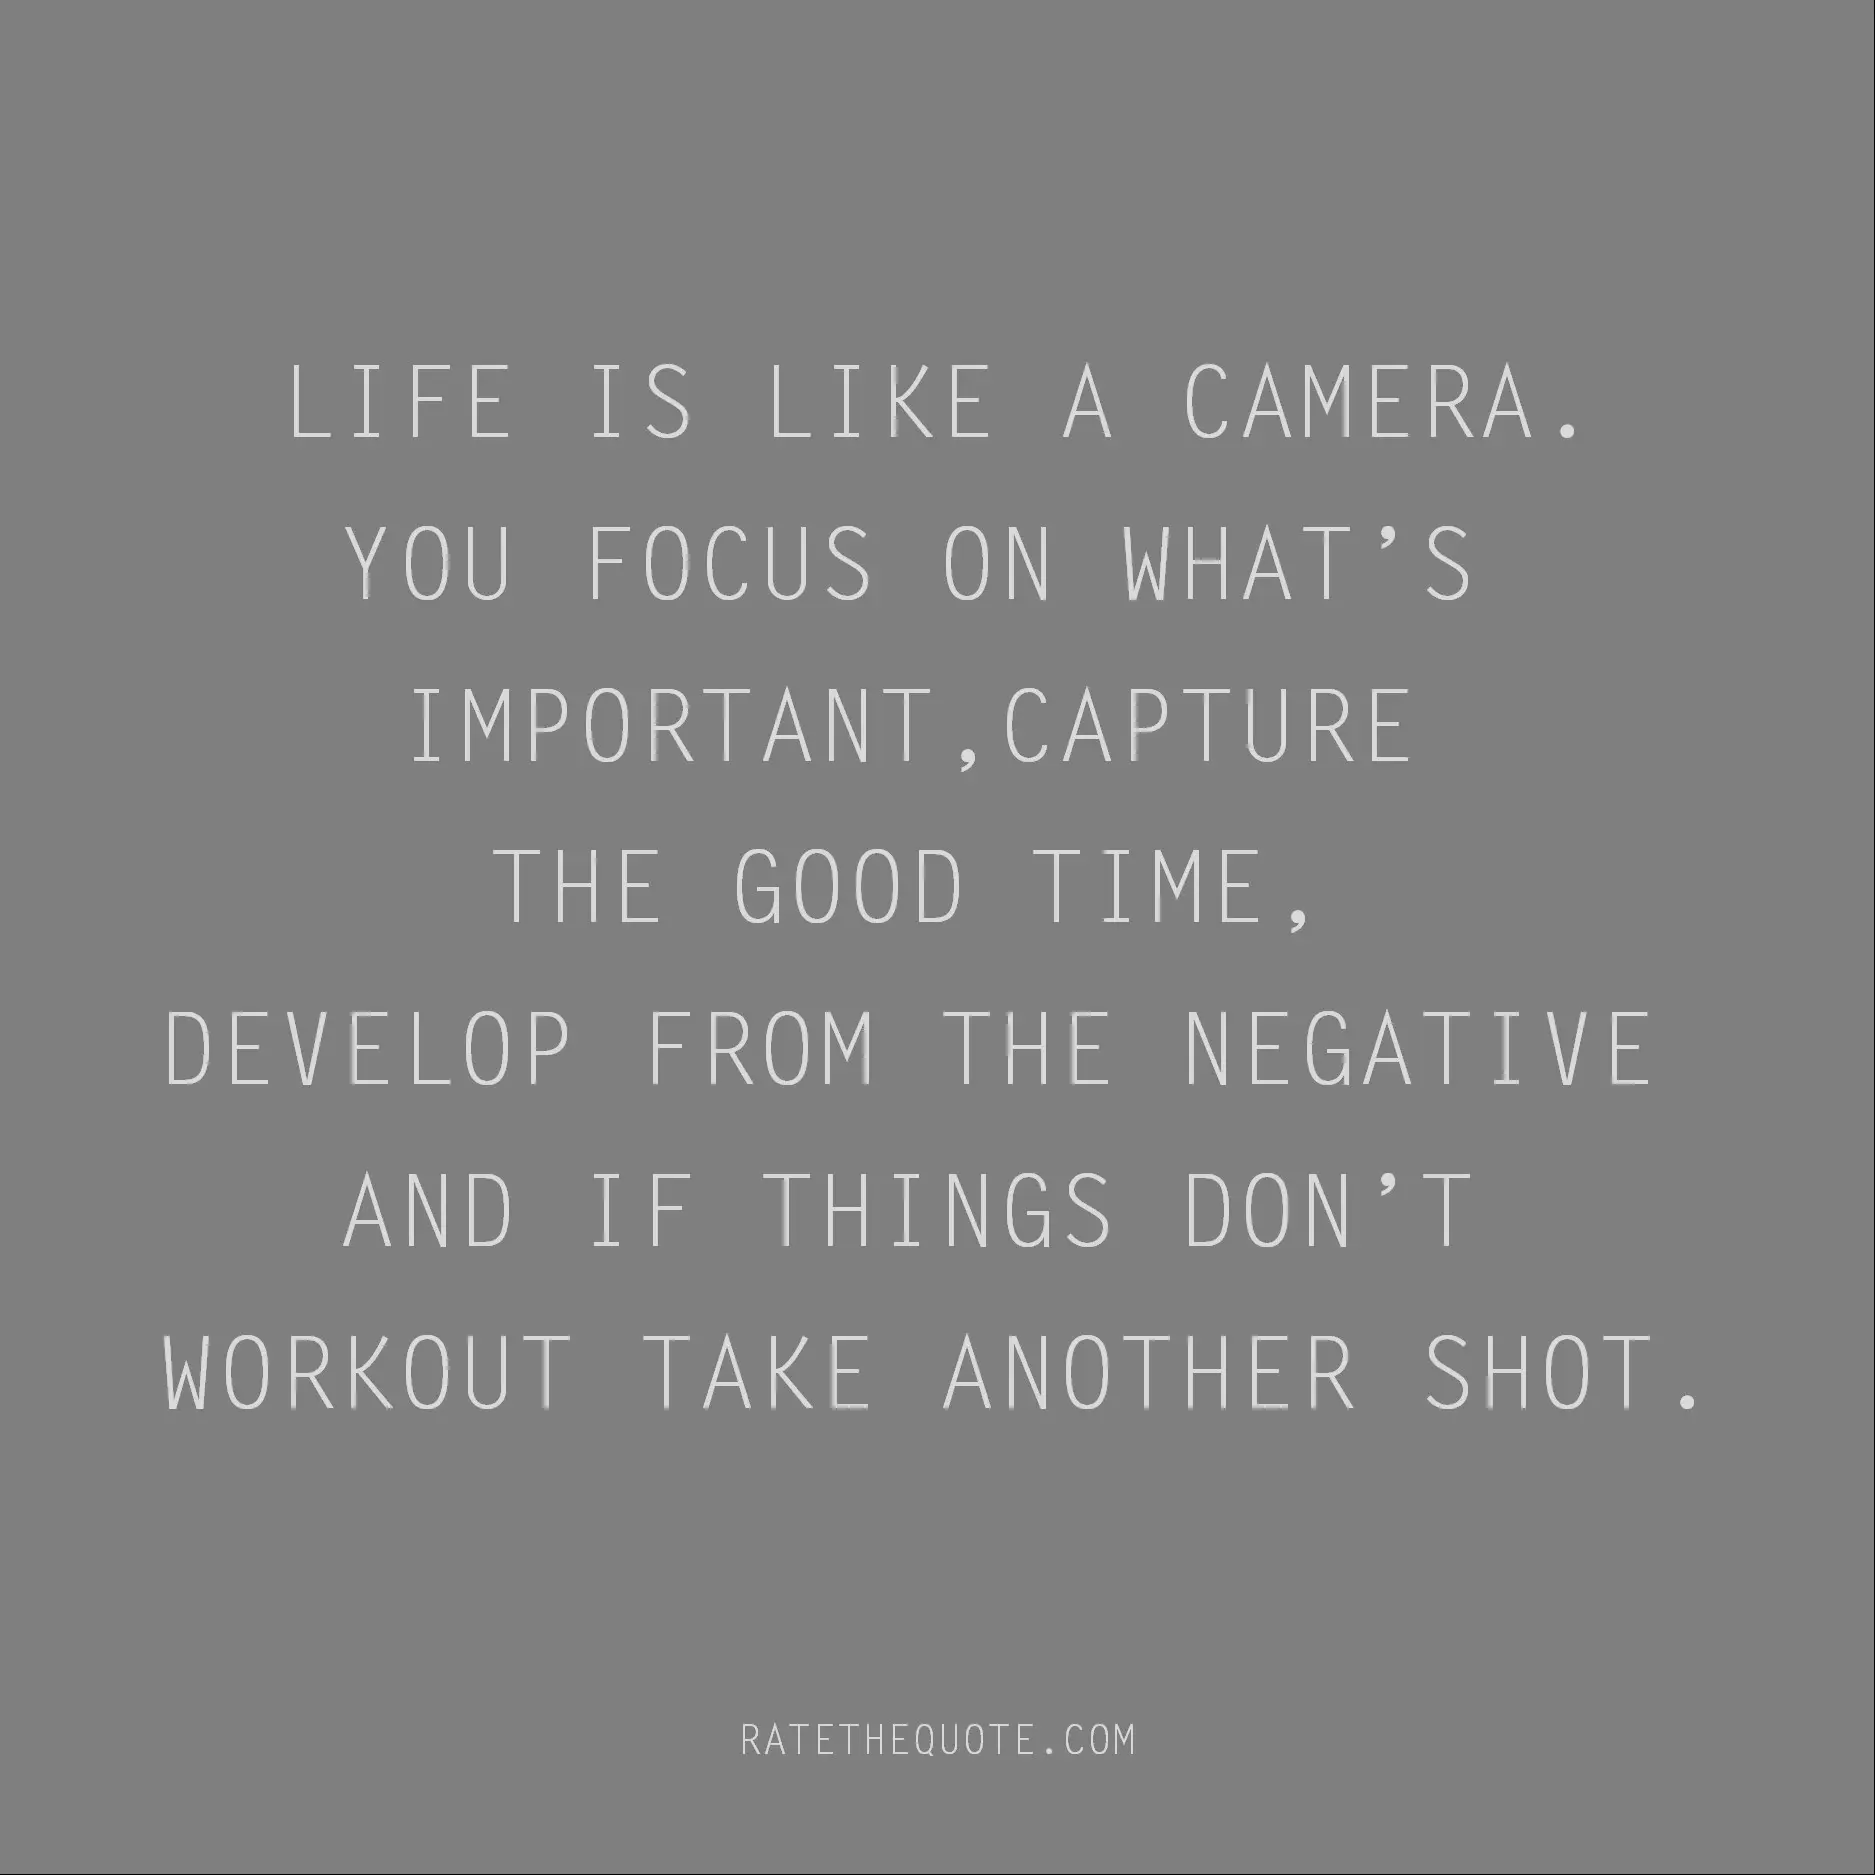 Life is like a camera.You focus on what’s important, capture the good time, develop from the negative and if things don’t workout take another shot.